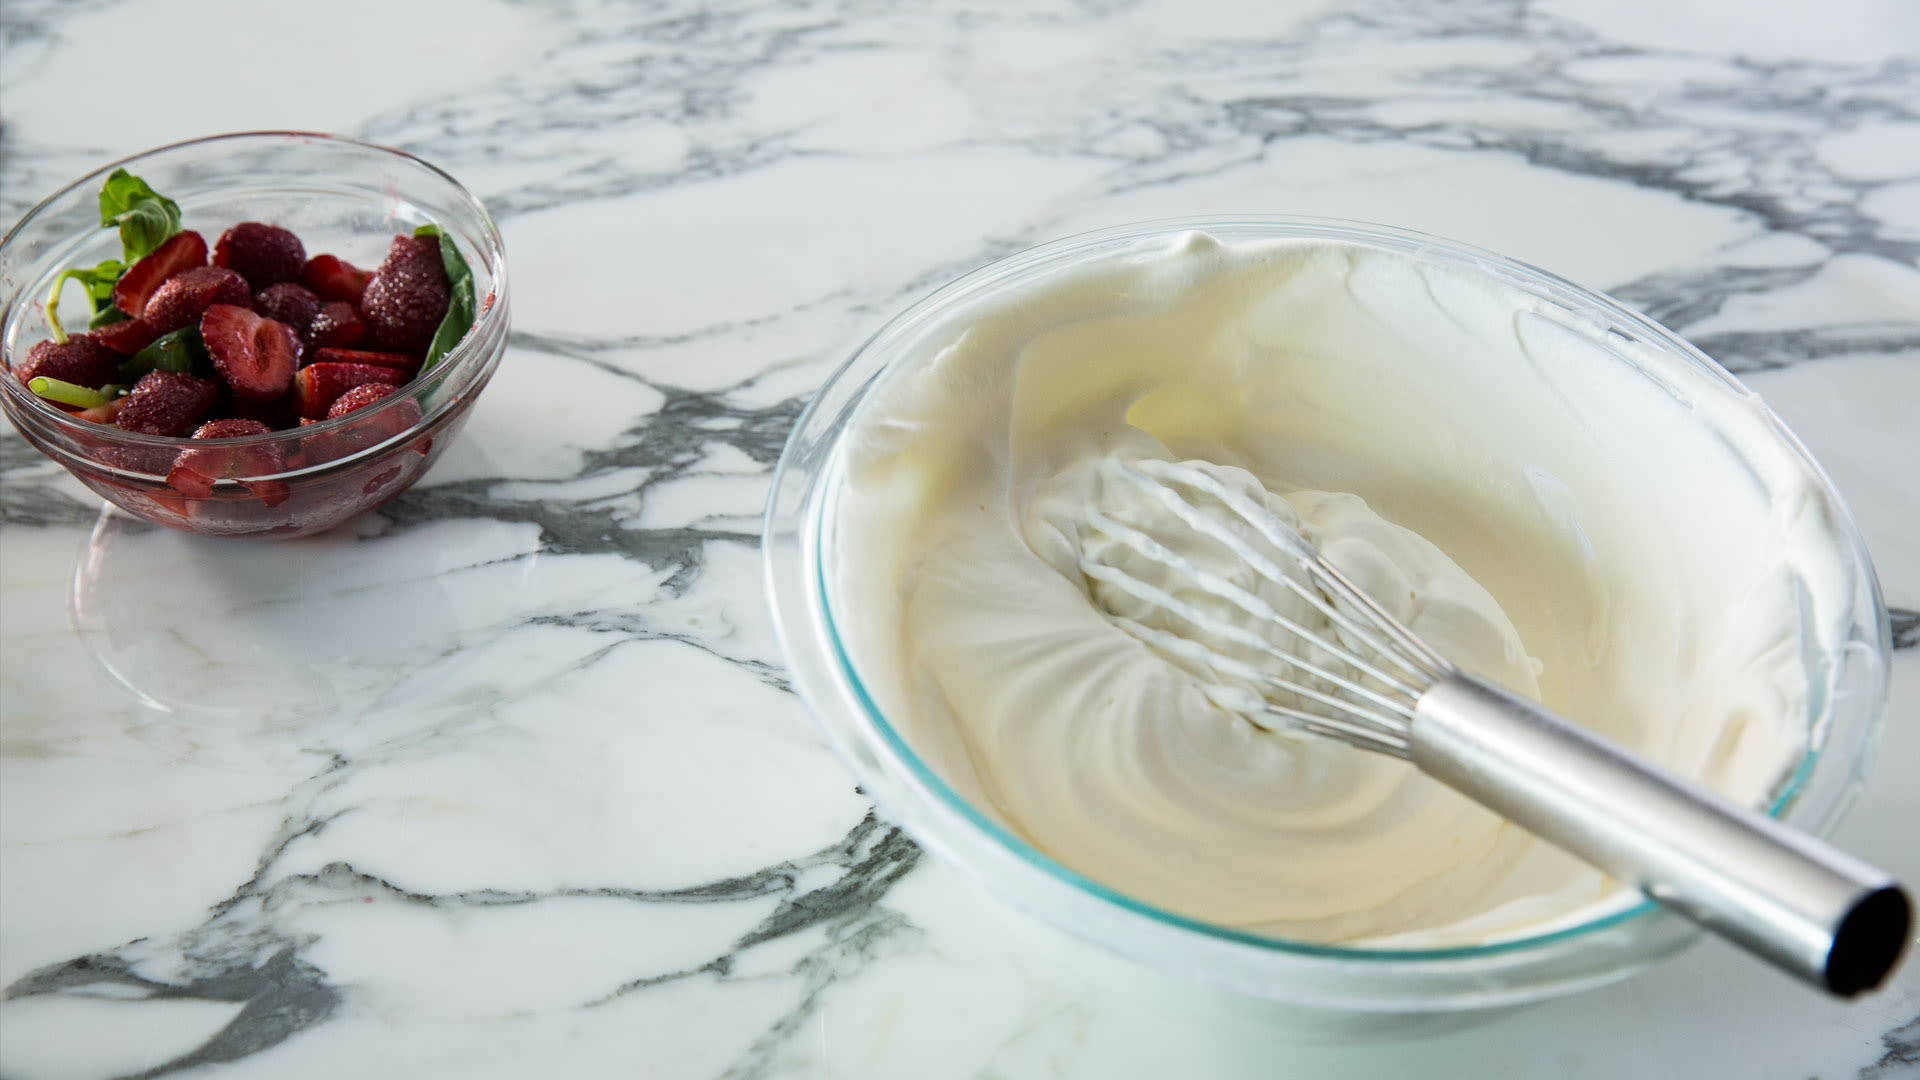 How to Make Whipped Cream By Hand.